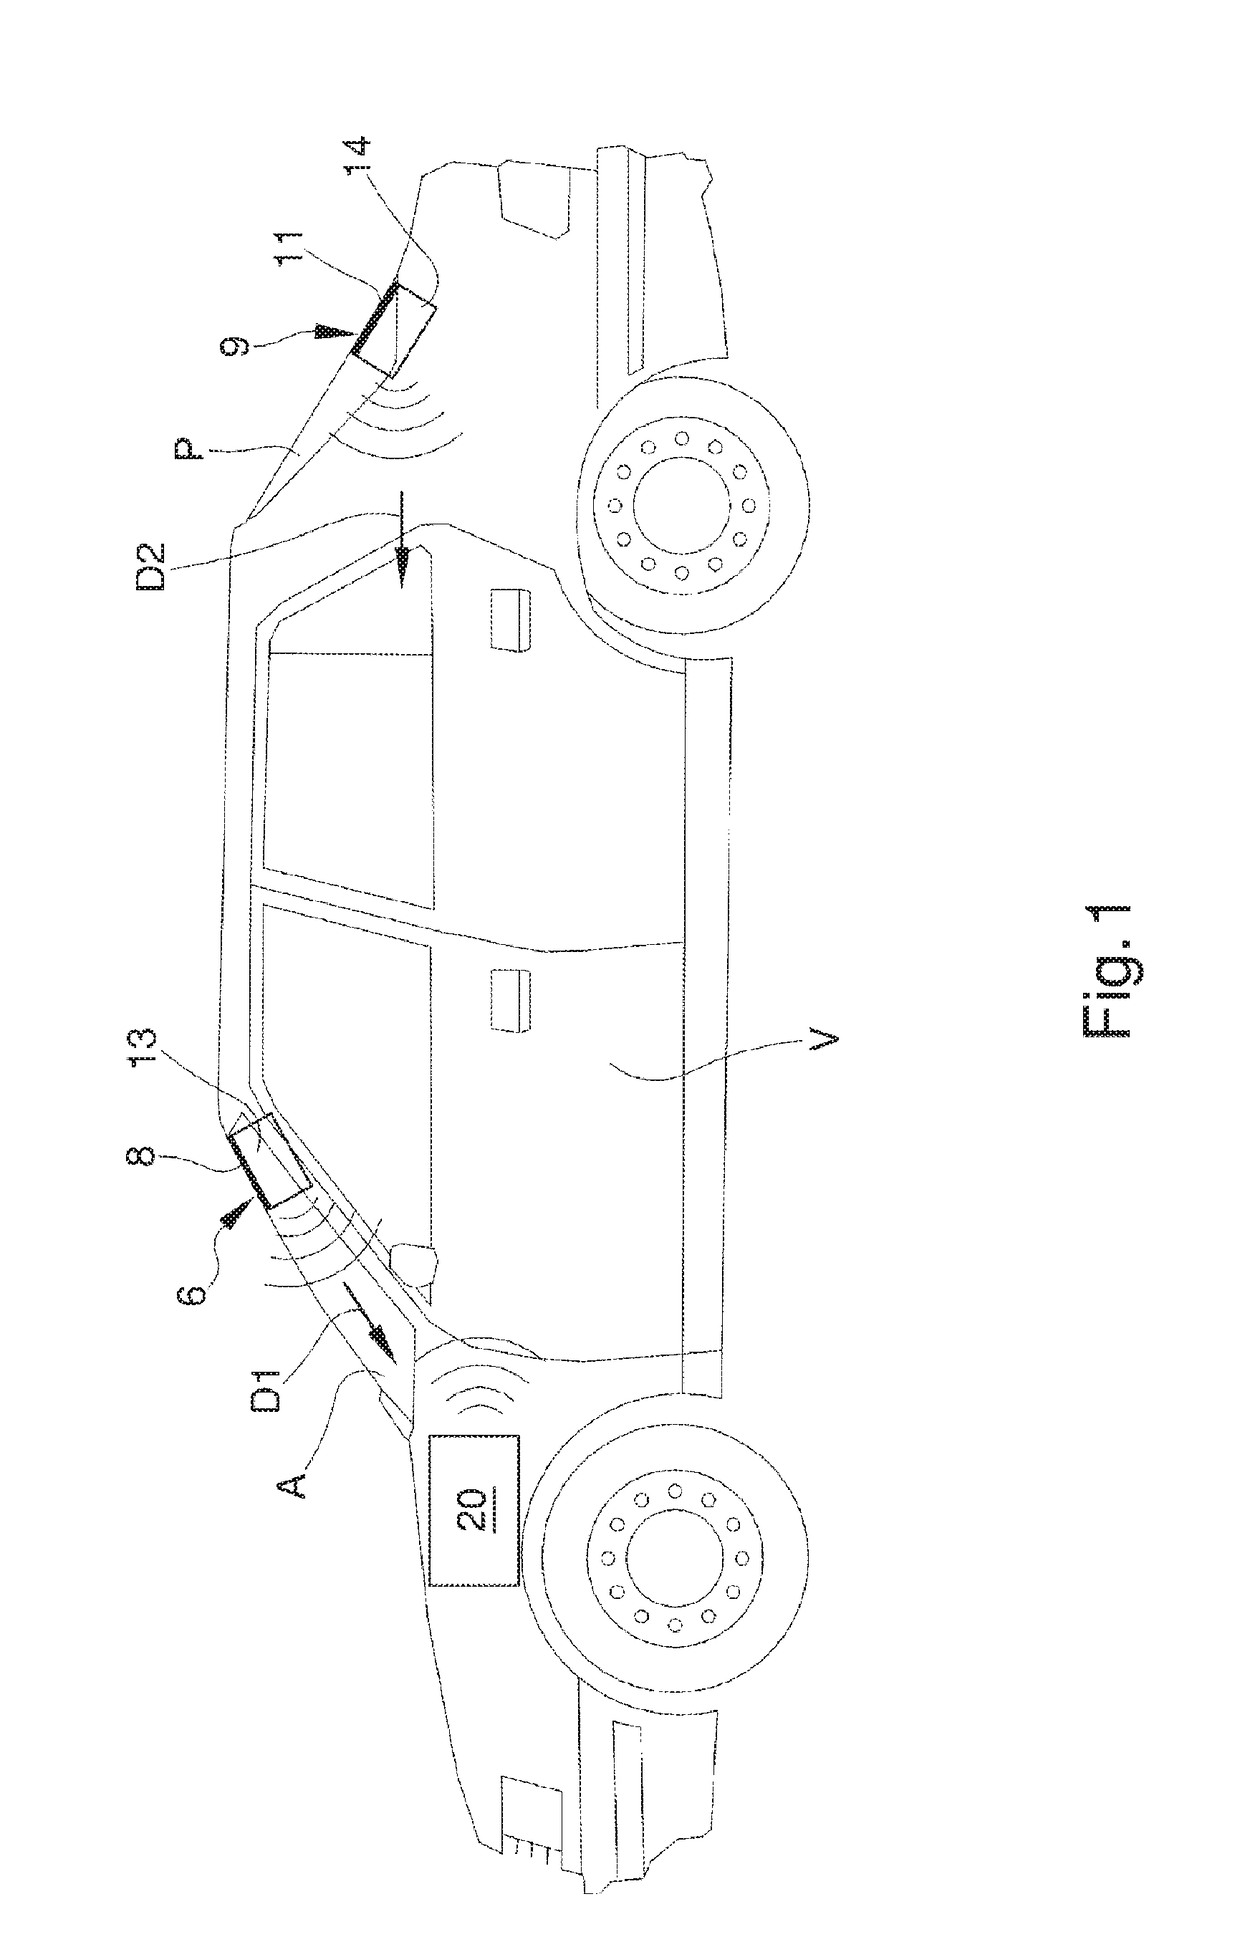 Telematic monitoring system for vehicles